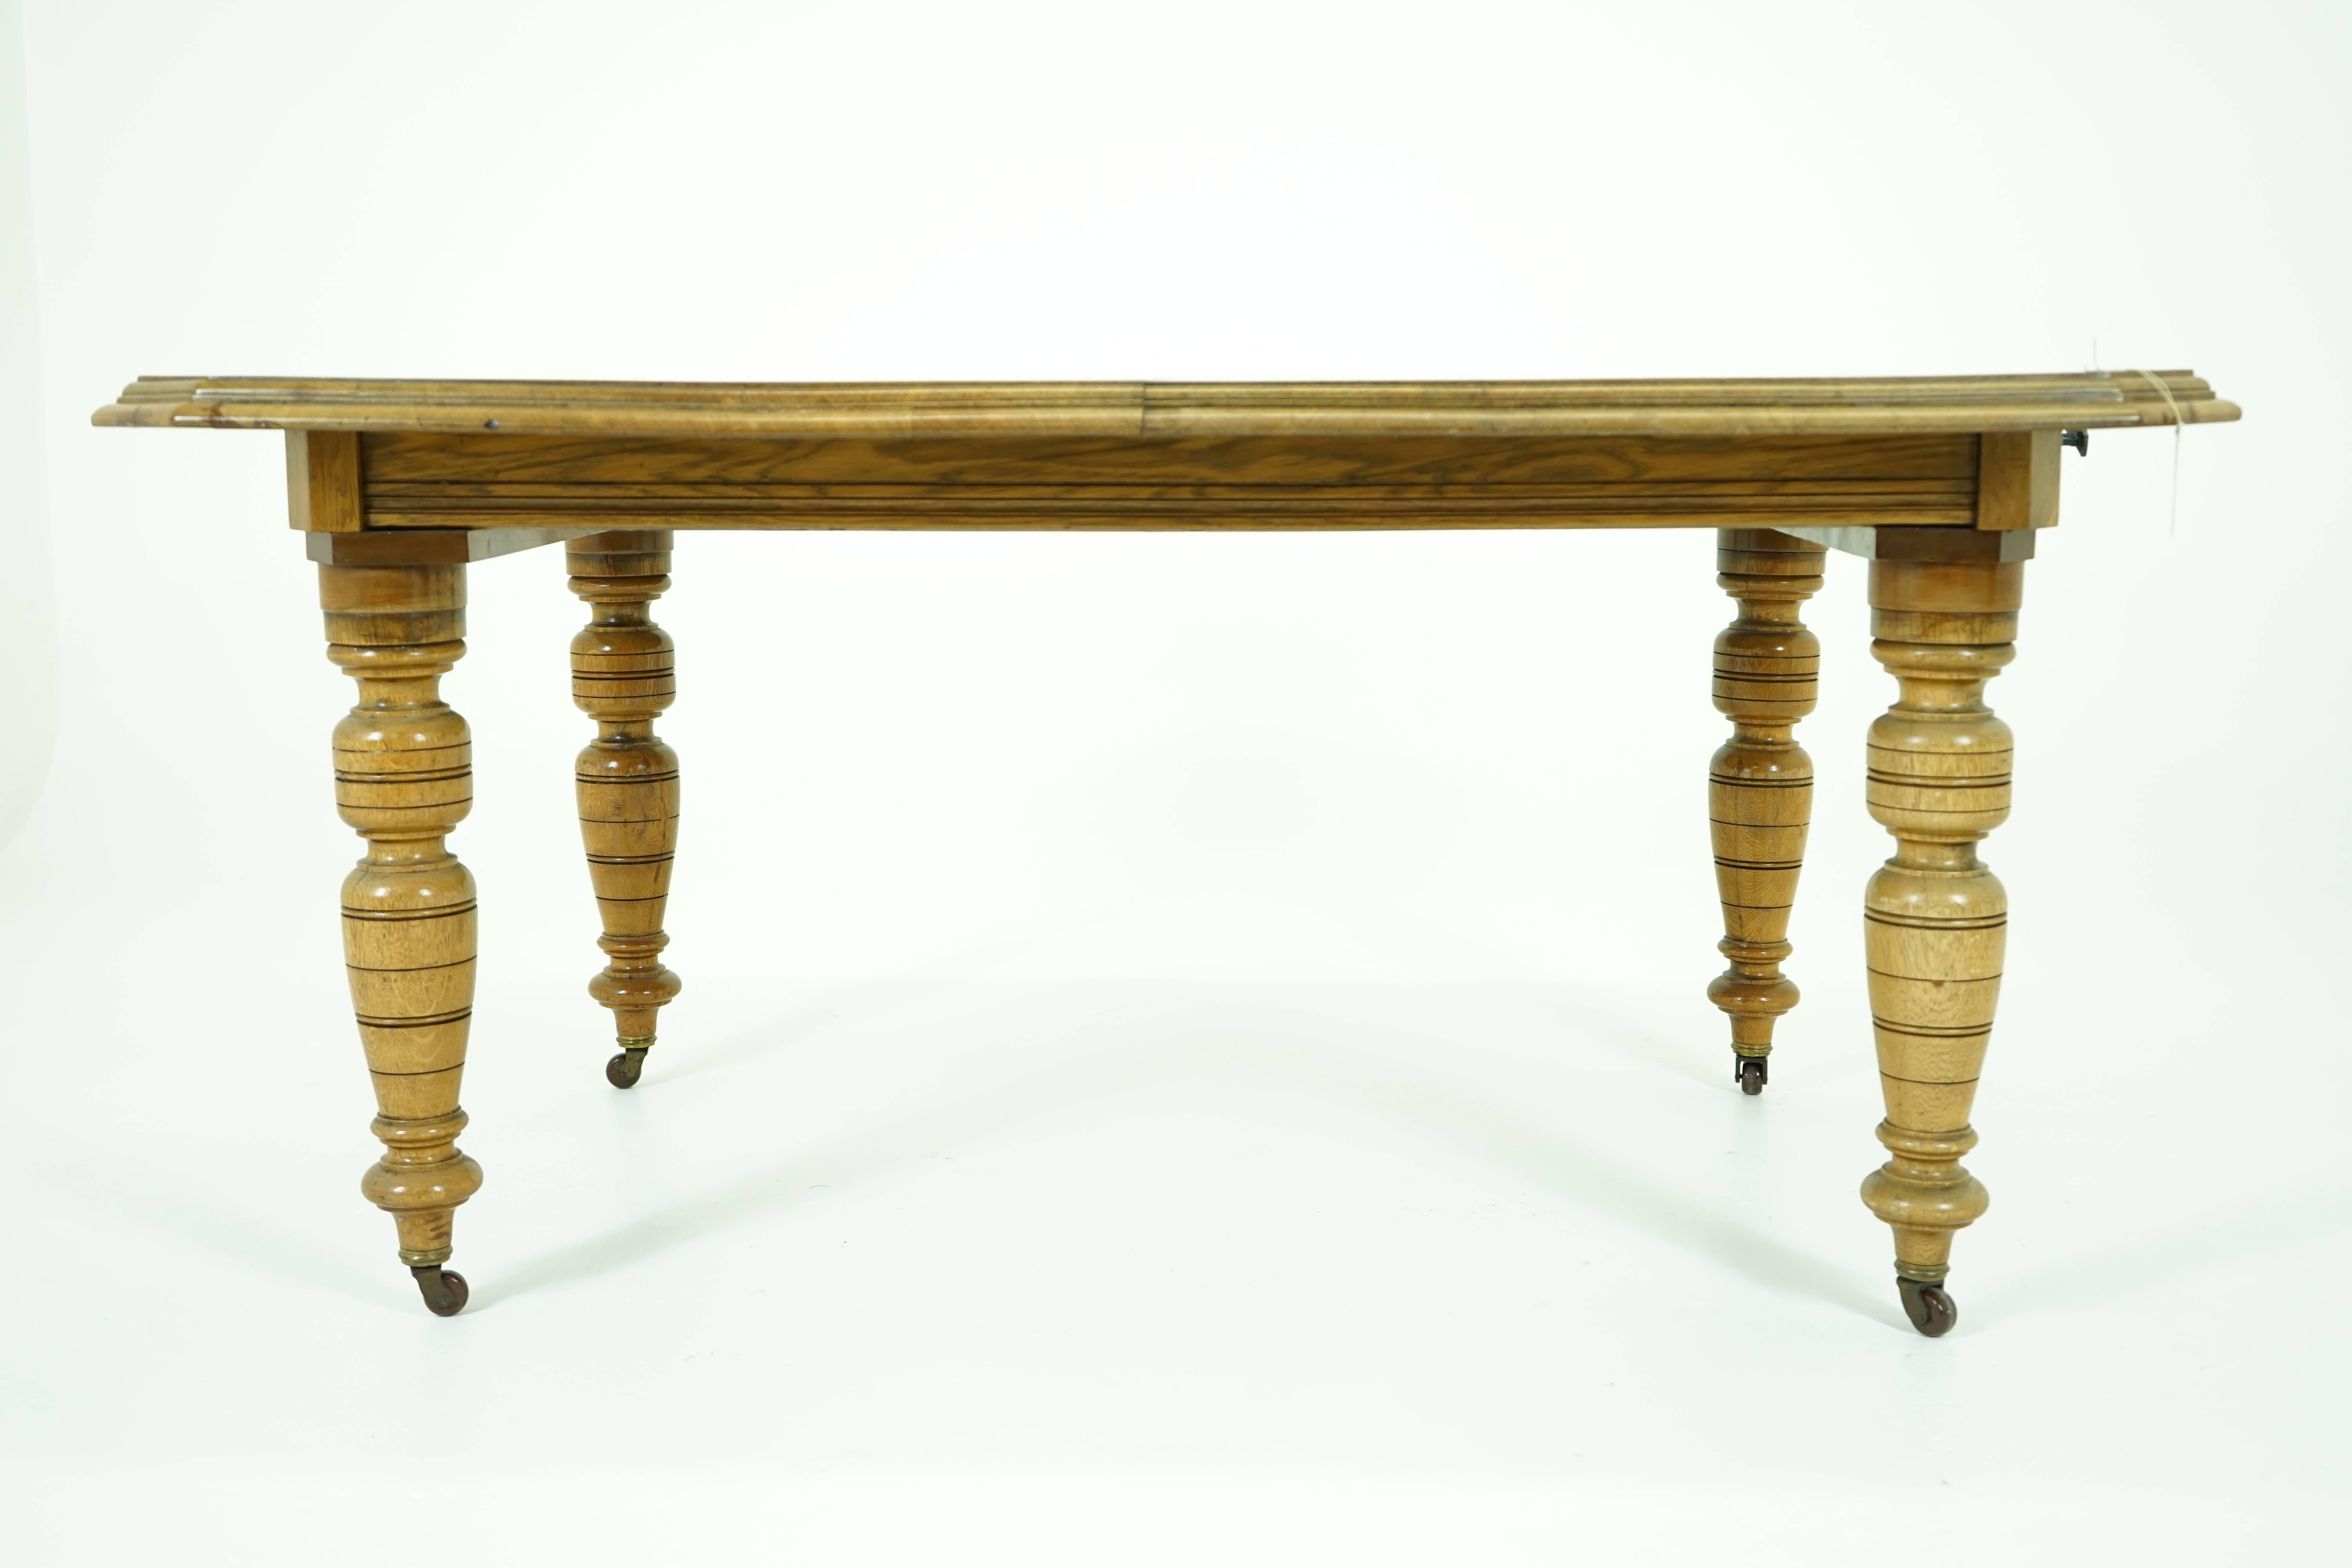 Hand-Crafted Antique Dining Table, Oak Dining Table, Vintage Dining Table, Victorian, B778   